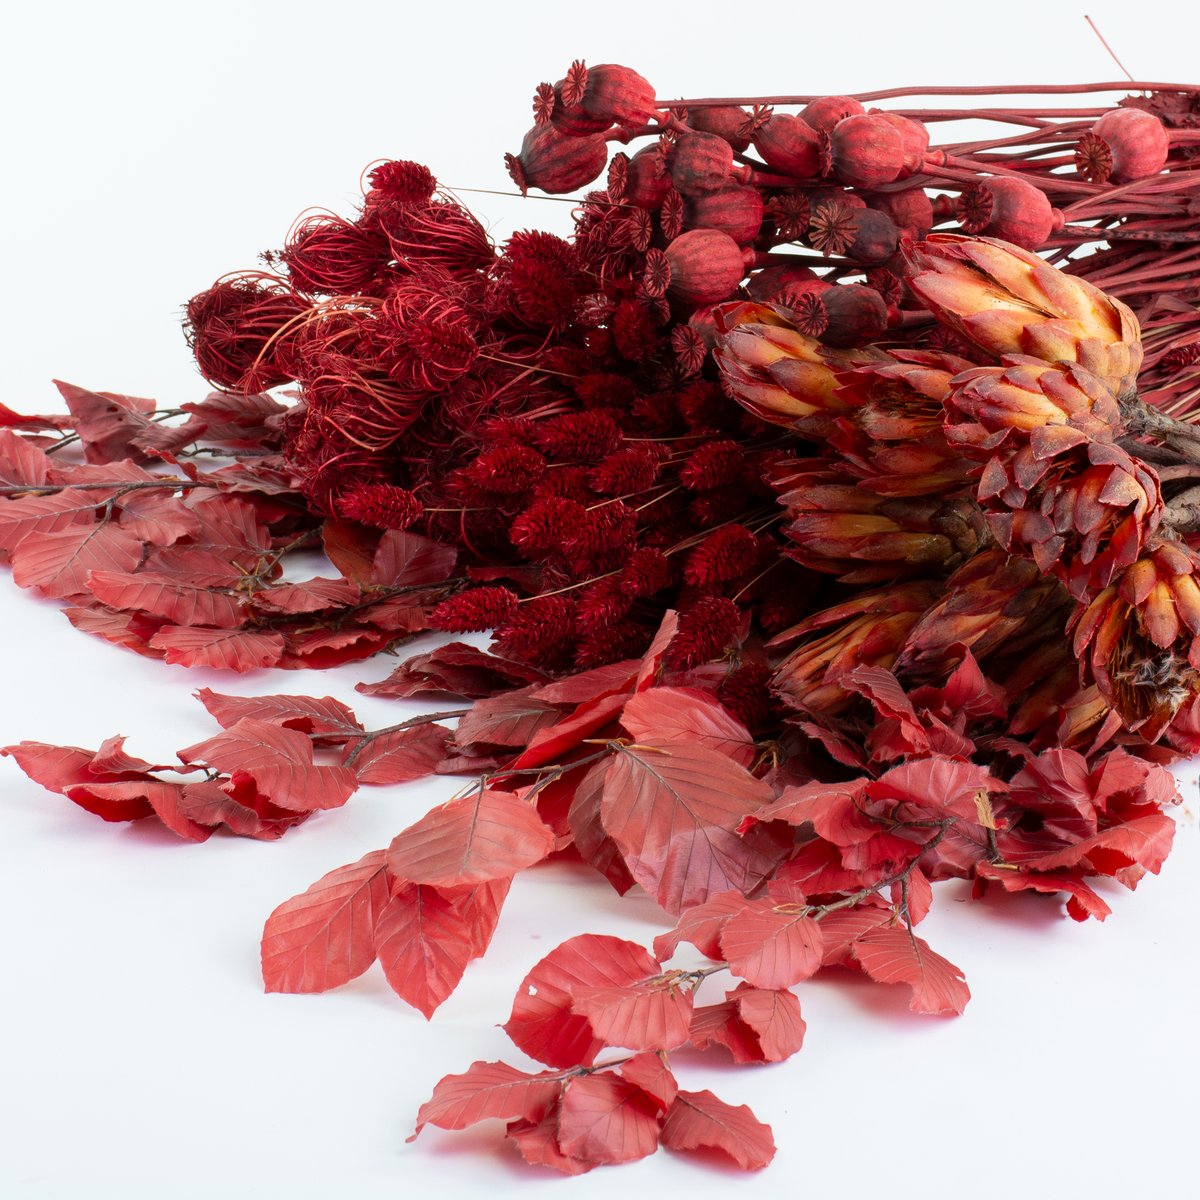 As the #Summer energy slowly starts to fade, we can take comfort in the warm colours of #Autumn atlasflowers.co.uk search #RED 
#driedammimajus #ammimajus #driedphalaris #phalaris  #preservedprotea #protea #preservedbeech #beech #driedpapaver #papaver #redpapaver #poppy